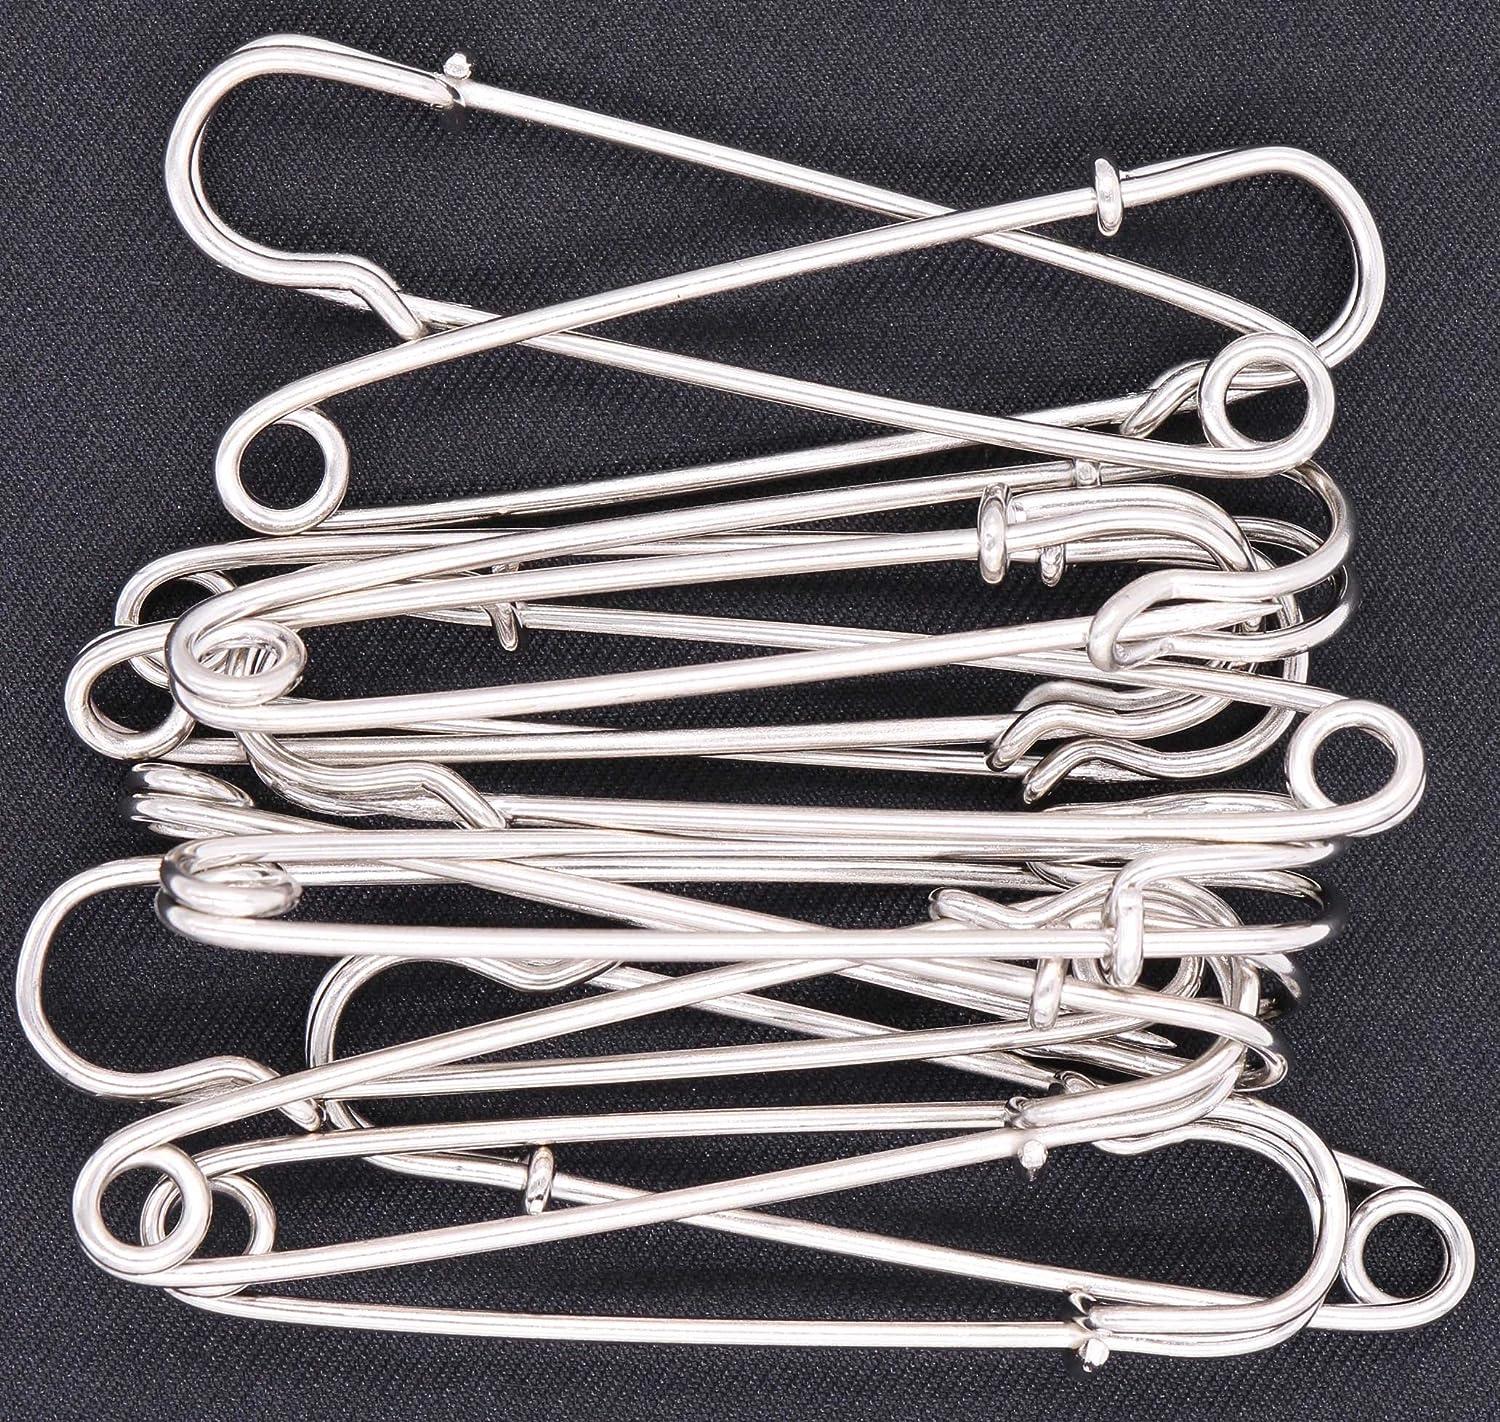 Large Safety Pins, 5 inch Safety Pins, 10 PCS Stainless Steel